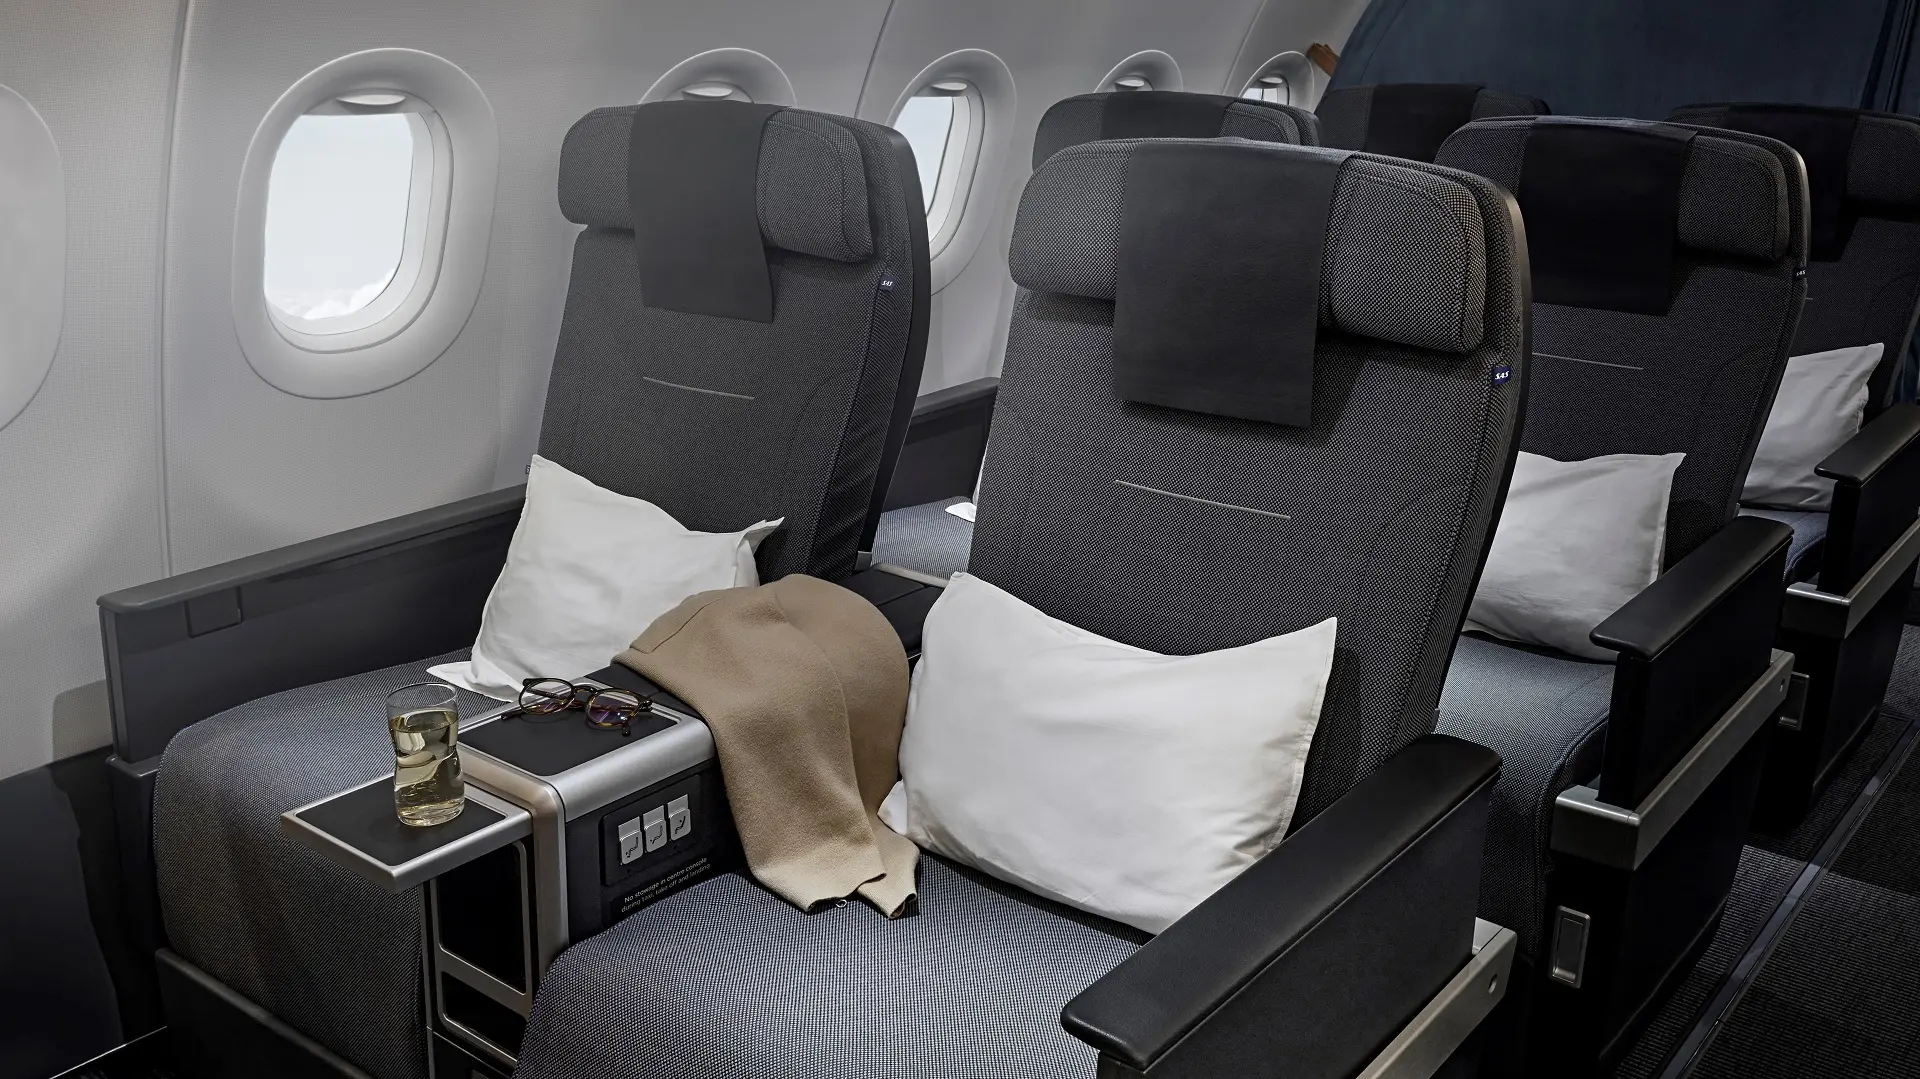 Airlines News - SAS looks to added comfort and boutique Champagne – an interview with its CEO, Anko Van der Werff